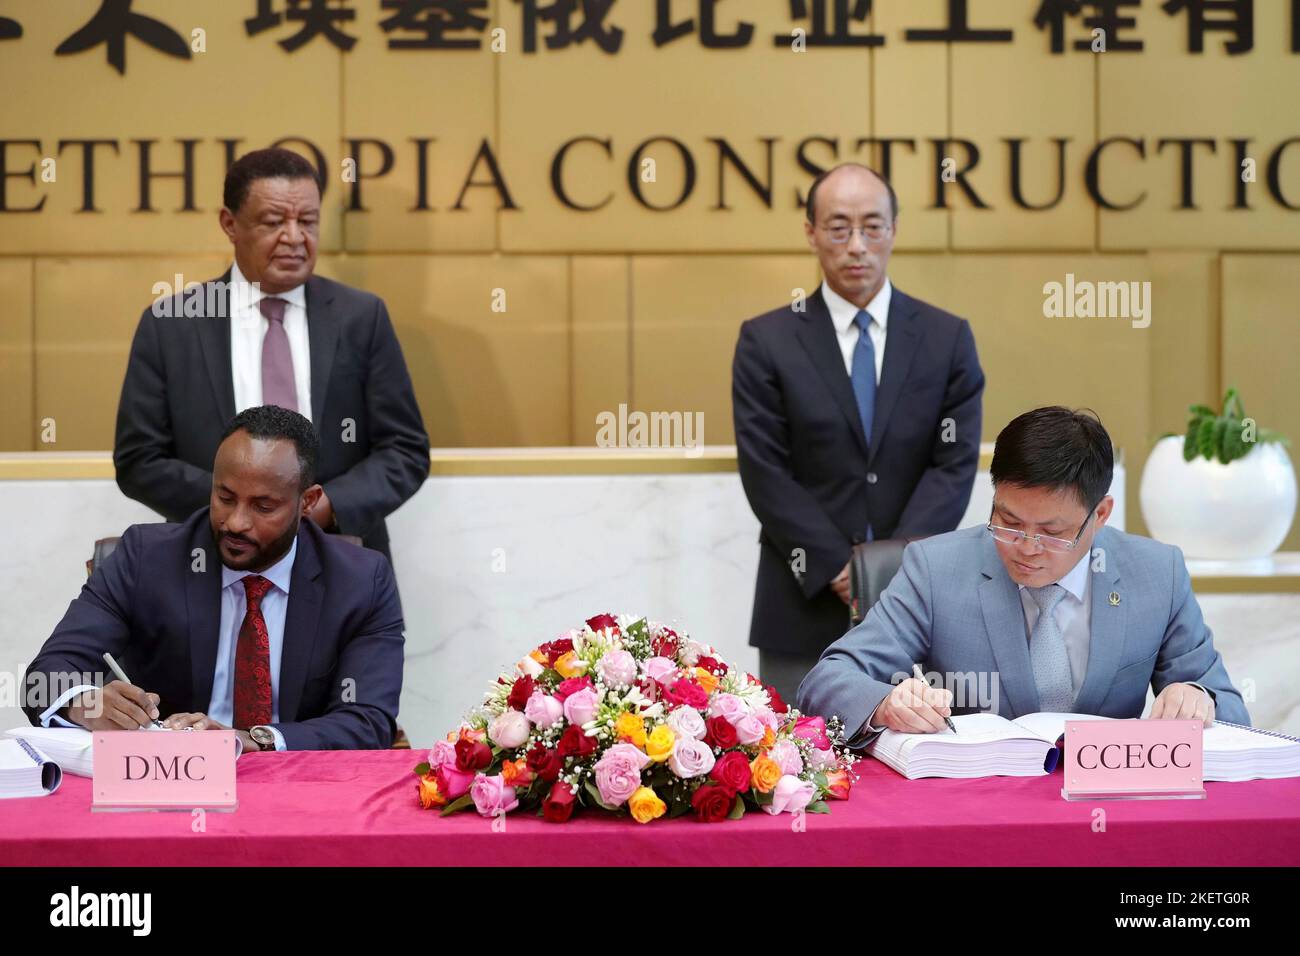 Addis Ababa, Ethiopia. 12th Nov, 2022. Representatives of China Civil Engineering Construction Corporation (CCECC) and DMC Trading Private Limited Company sign an agreement in Addis Ababa, Ethiopia, Nov. 12, 2022. Chinese construction giant CCECC on Saturday signed an agreement with an Ethiopian company to build a business complex in Addis Ababa, the capital of Ethiopia. TO GO WITH 'Chinese company to build business complex in Ethiopian capital' Credit: Wang Ping/Xinhua/Alamy Live News Stock Photo